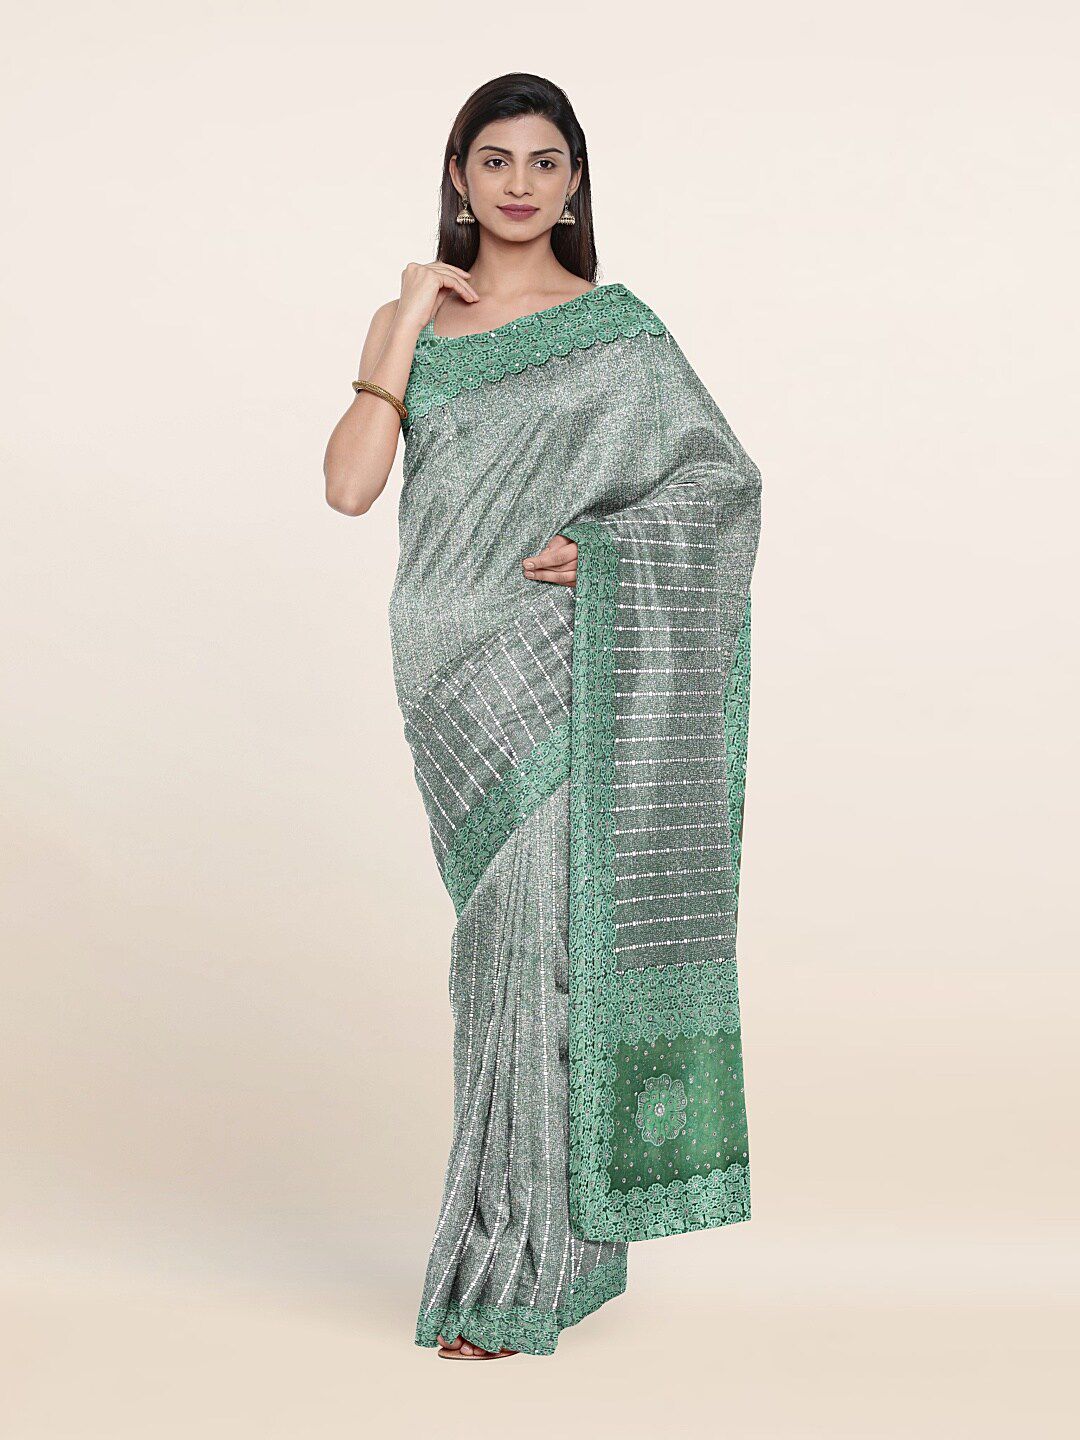 Pothys Green & Silver-Toned Floral Beads and Stones Saree Price in India